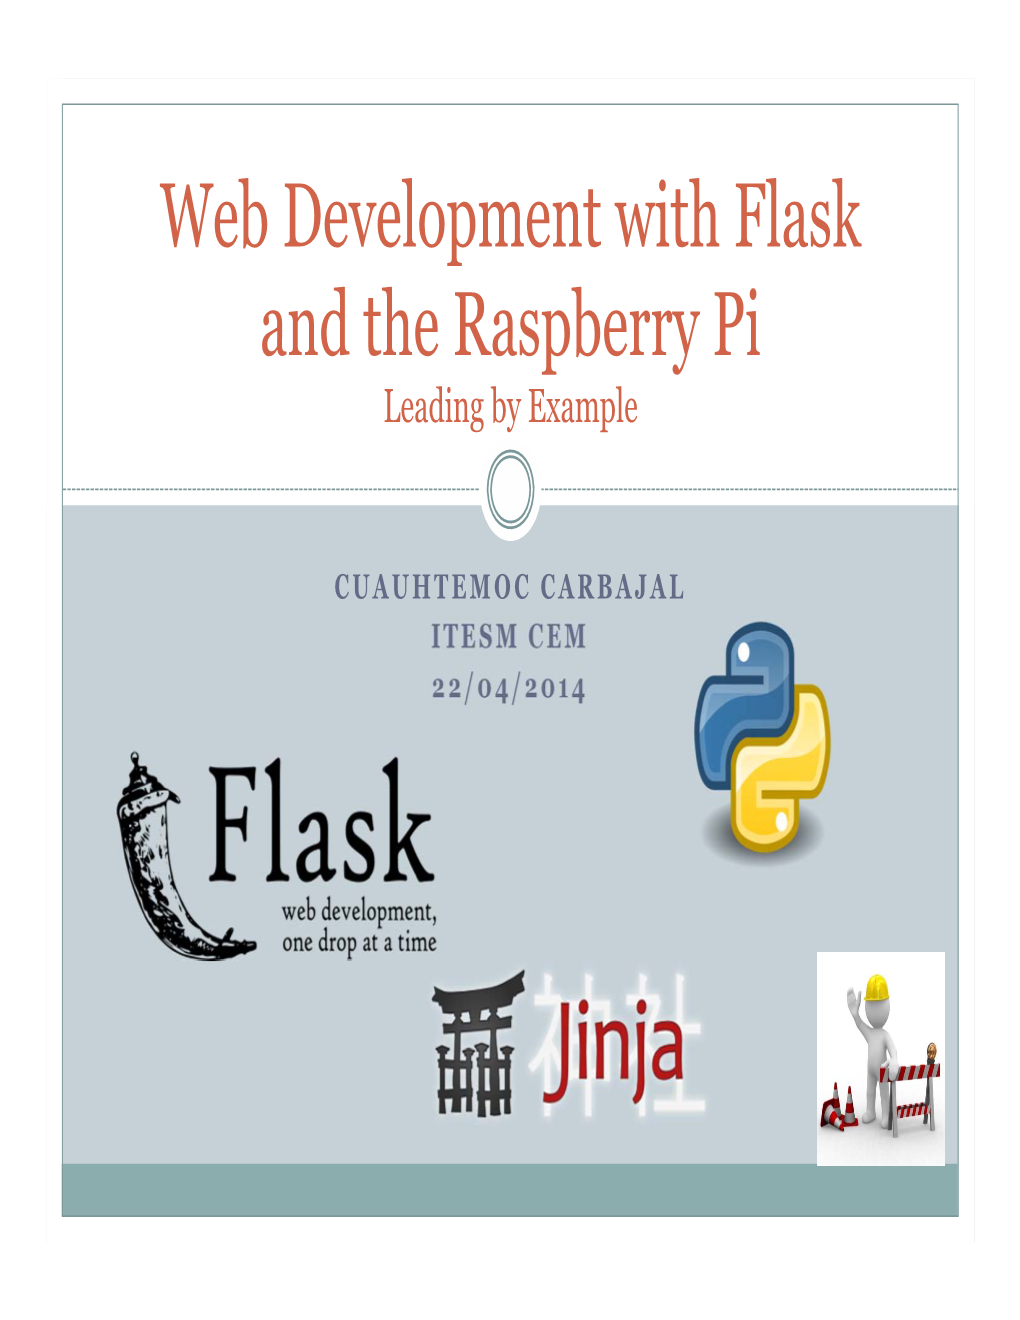 Web Development with Flask and the Raspberry Pi Leading by Example